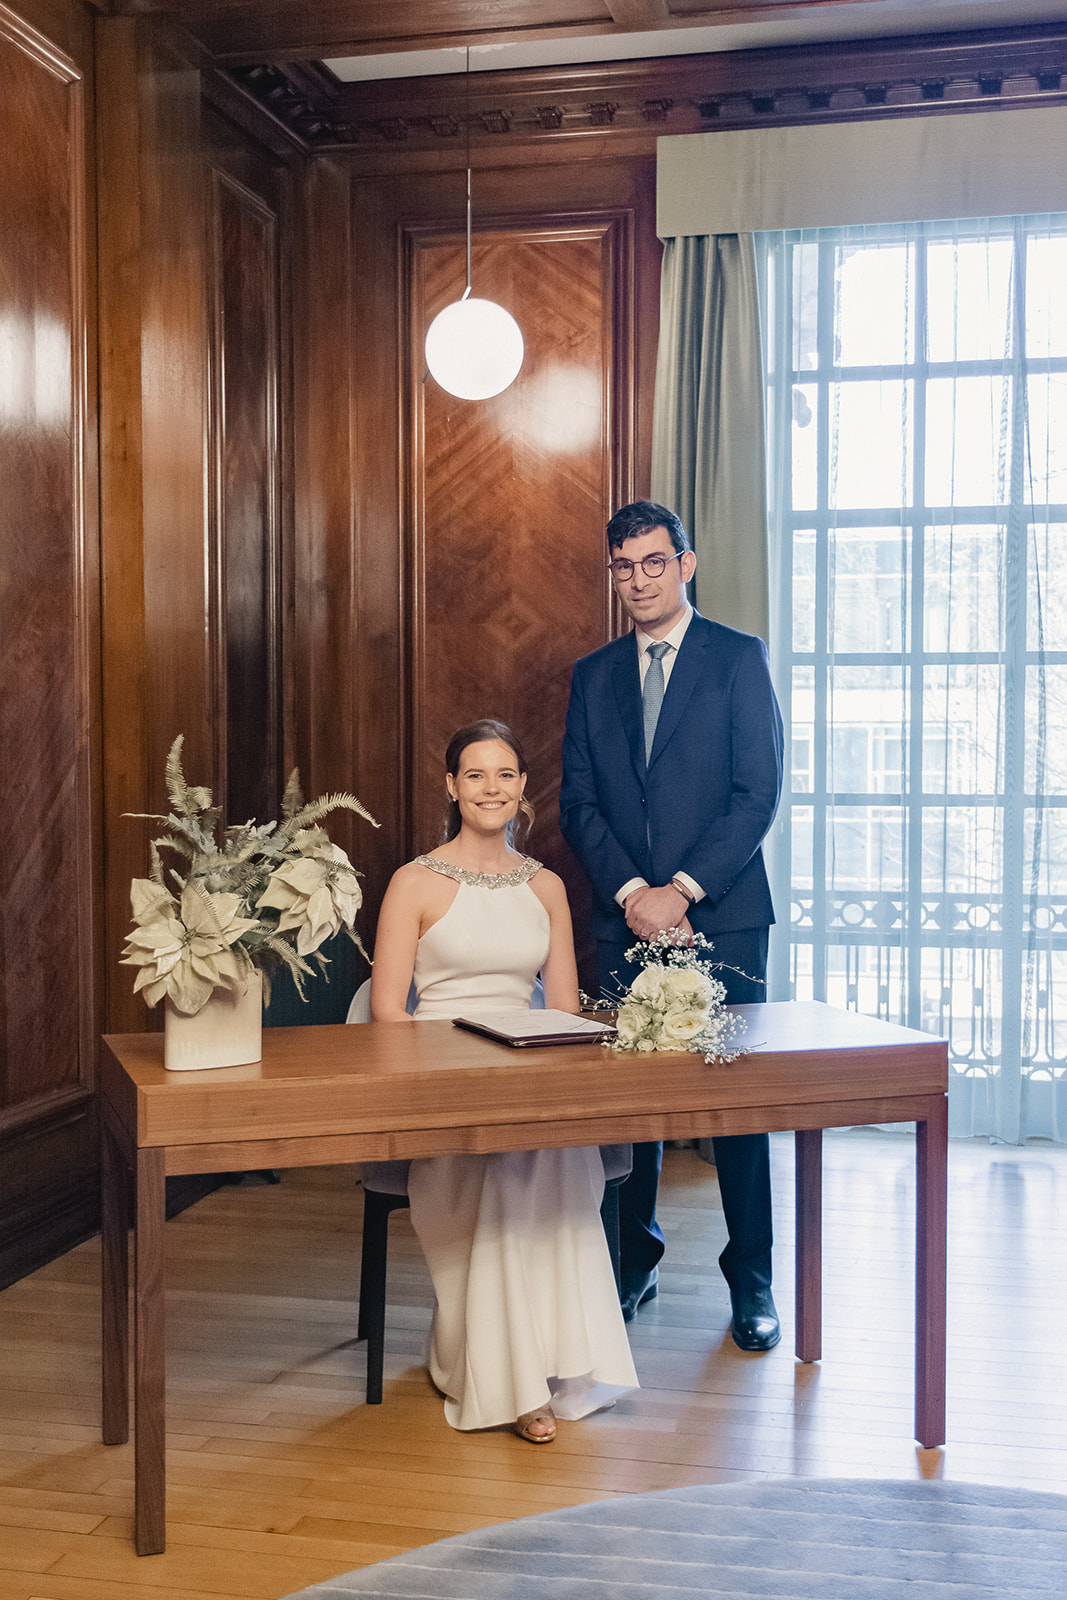 Kinga and Jean-Marc during the wedding ceremony in the Marylebone Room at The Old Marylebone Town Hall